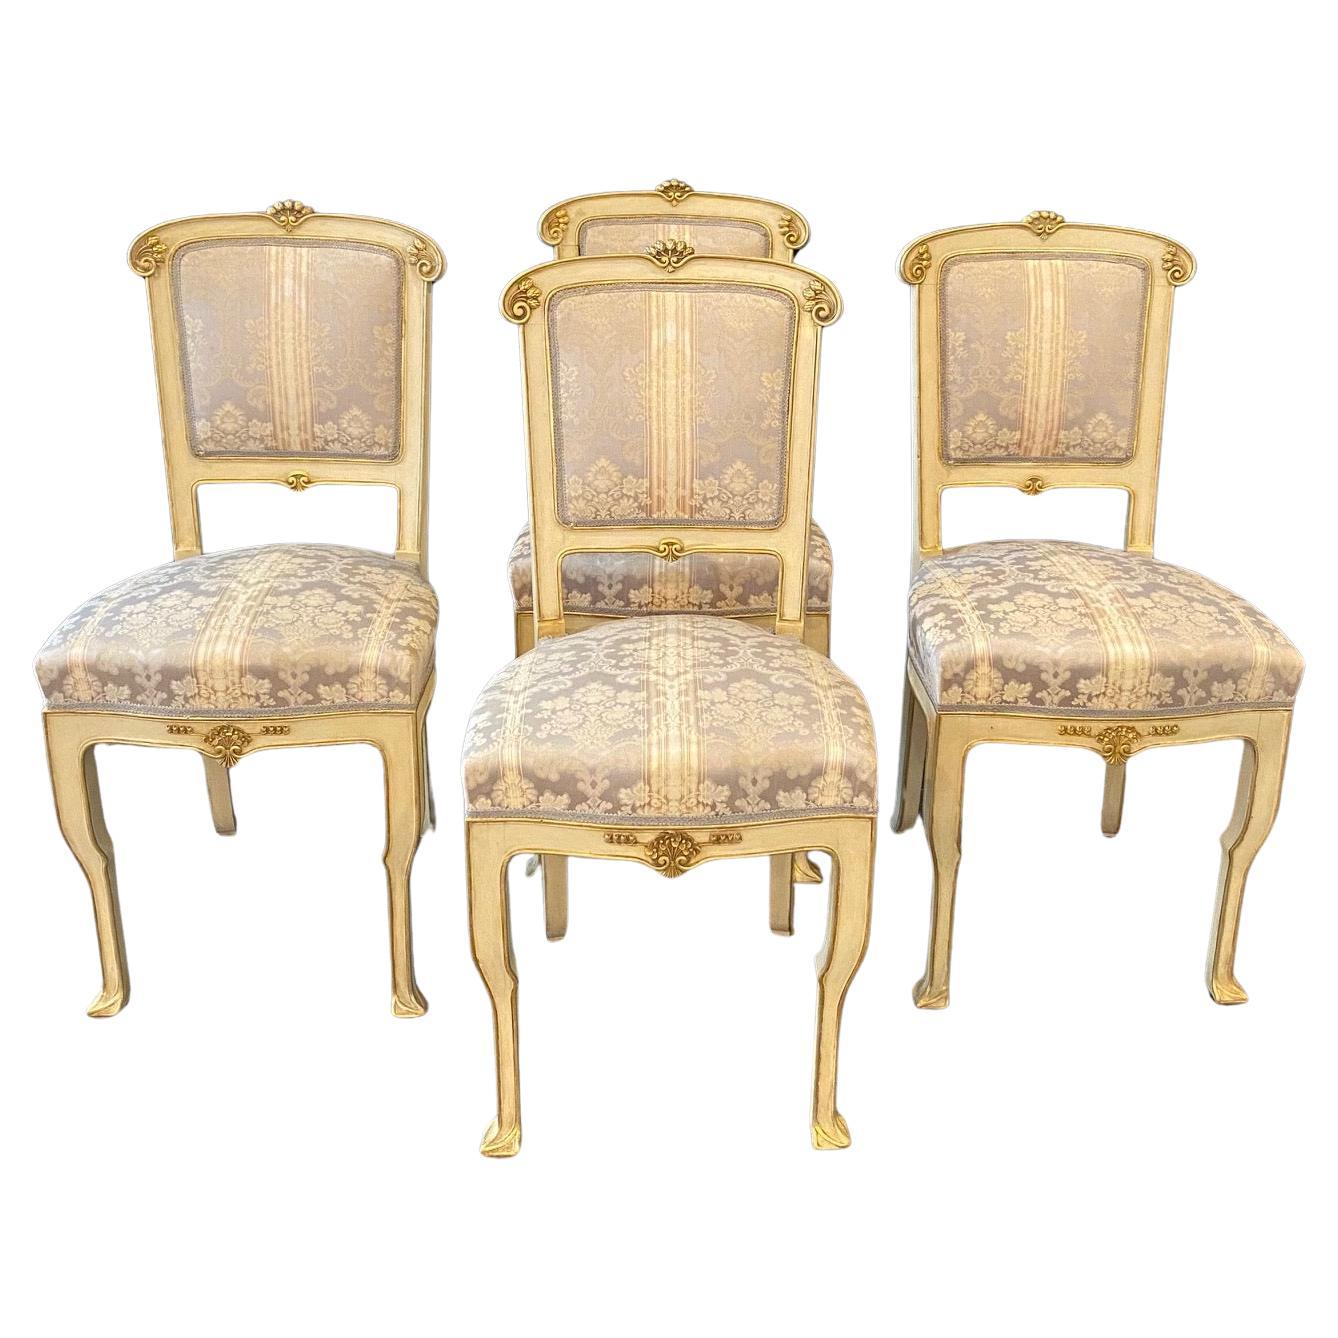 Set of 4 Italian Art Nouveau Gold Gilt and Cream Painted Dining Chairs For Sale